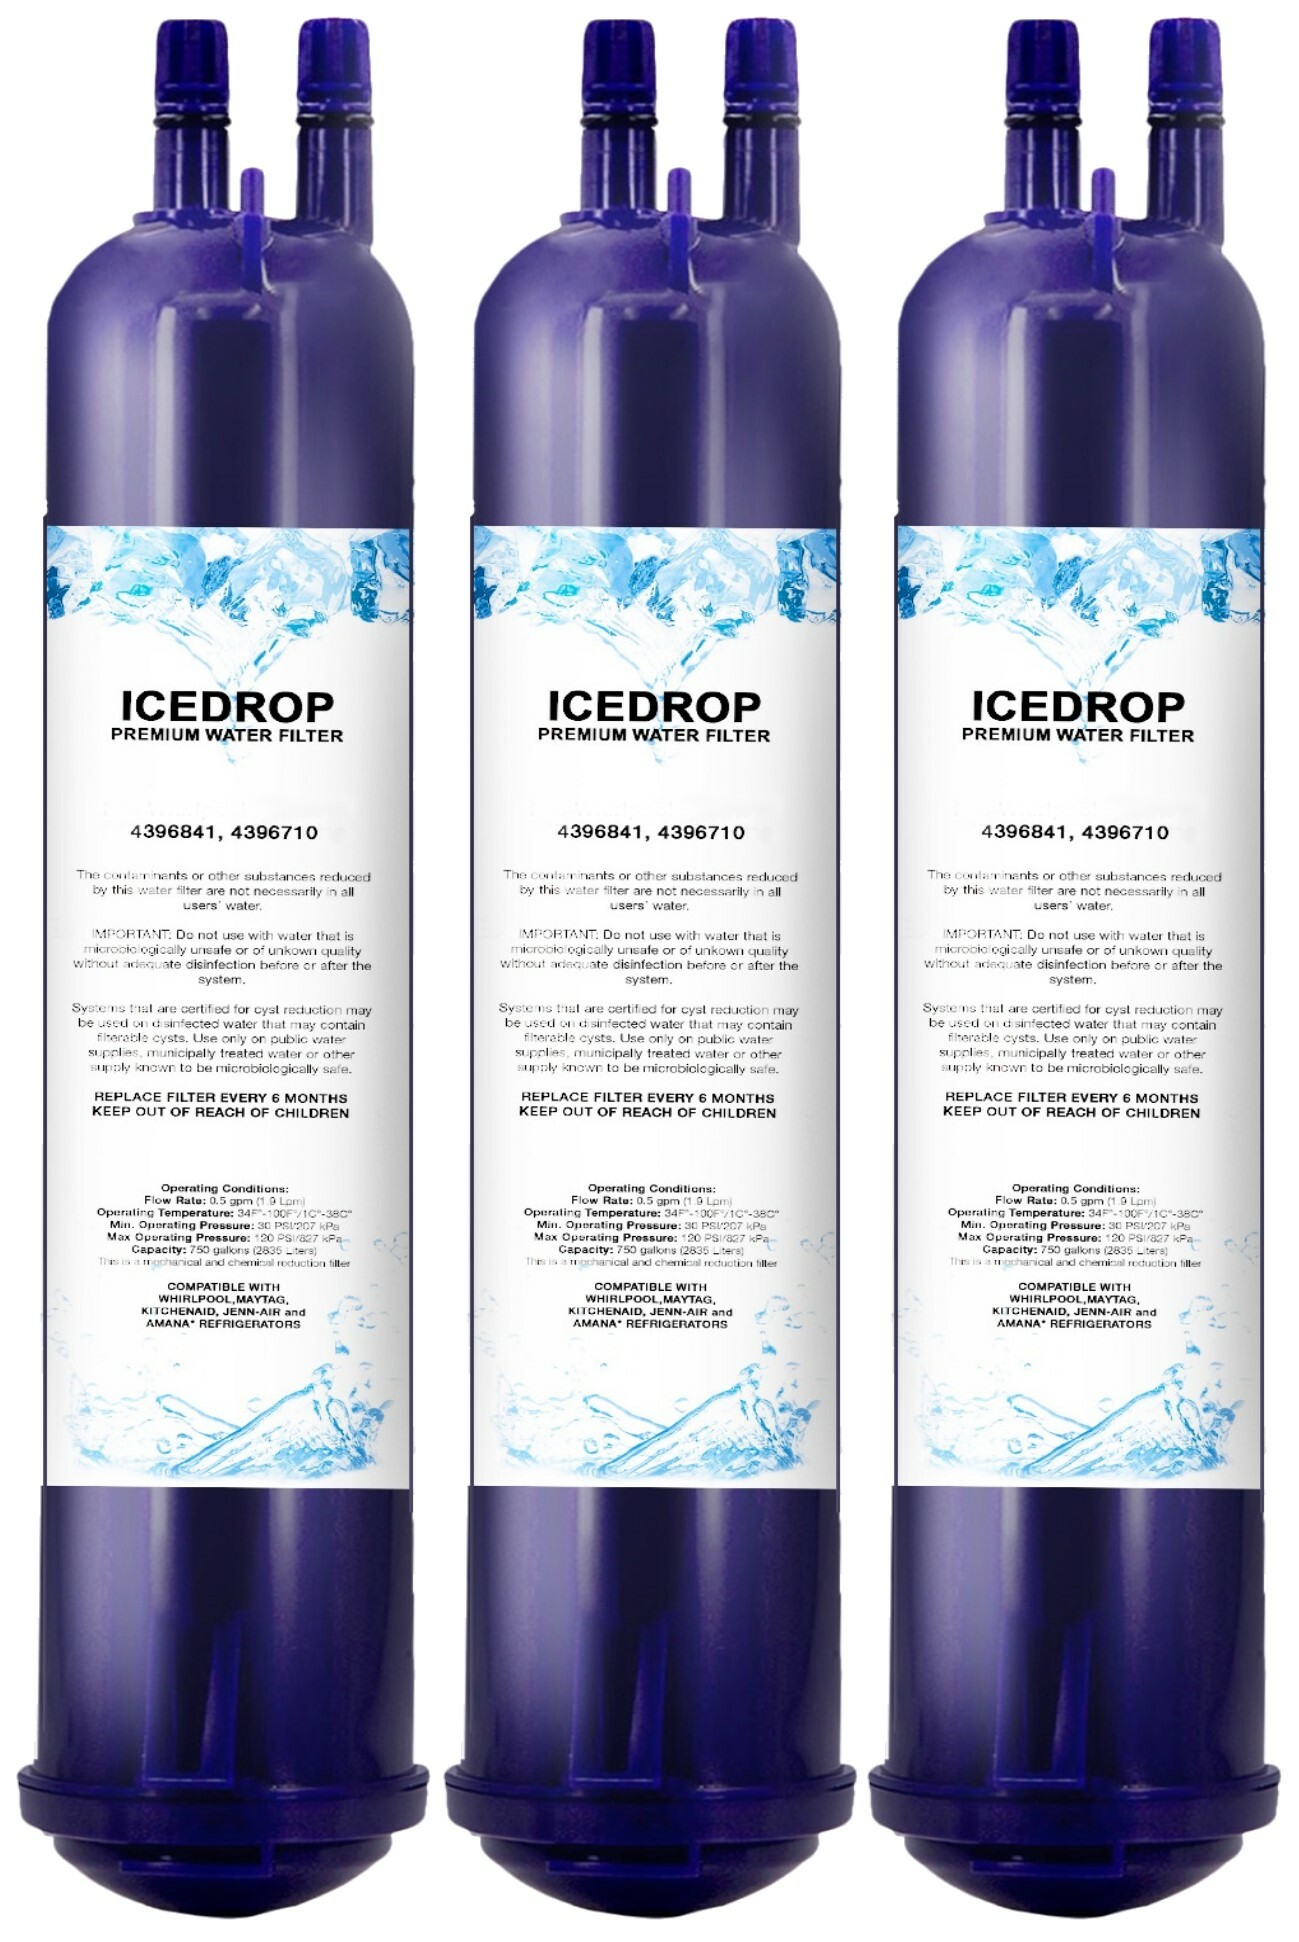 Ice Drop Refrigerator Water Filter Compatible with Fridge Water Filter 4396841 EDR3RXD1 Everydrop Filter 3 4396710P Kenmore 9083 (3 Pack)